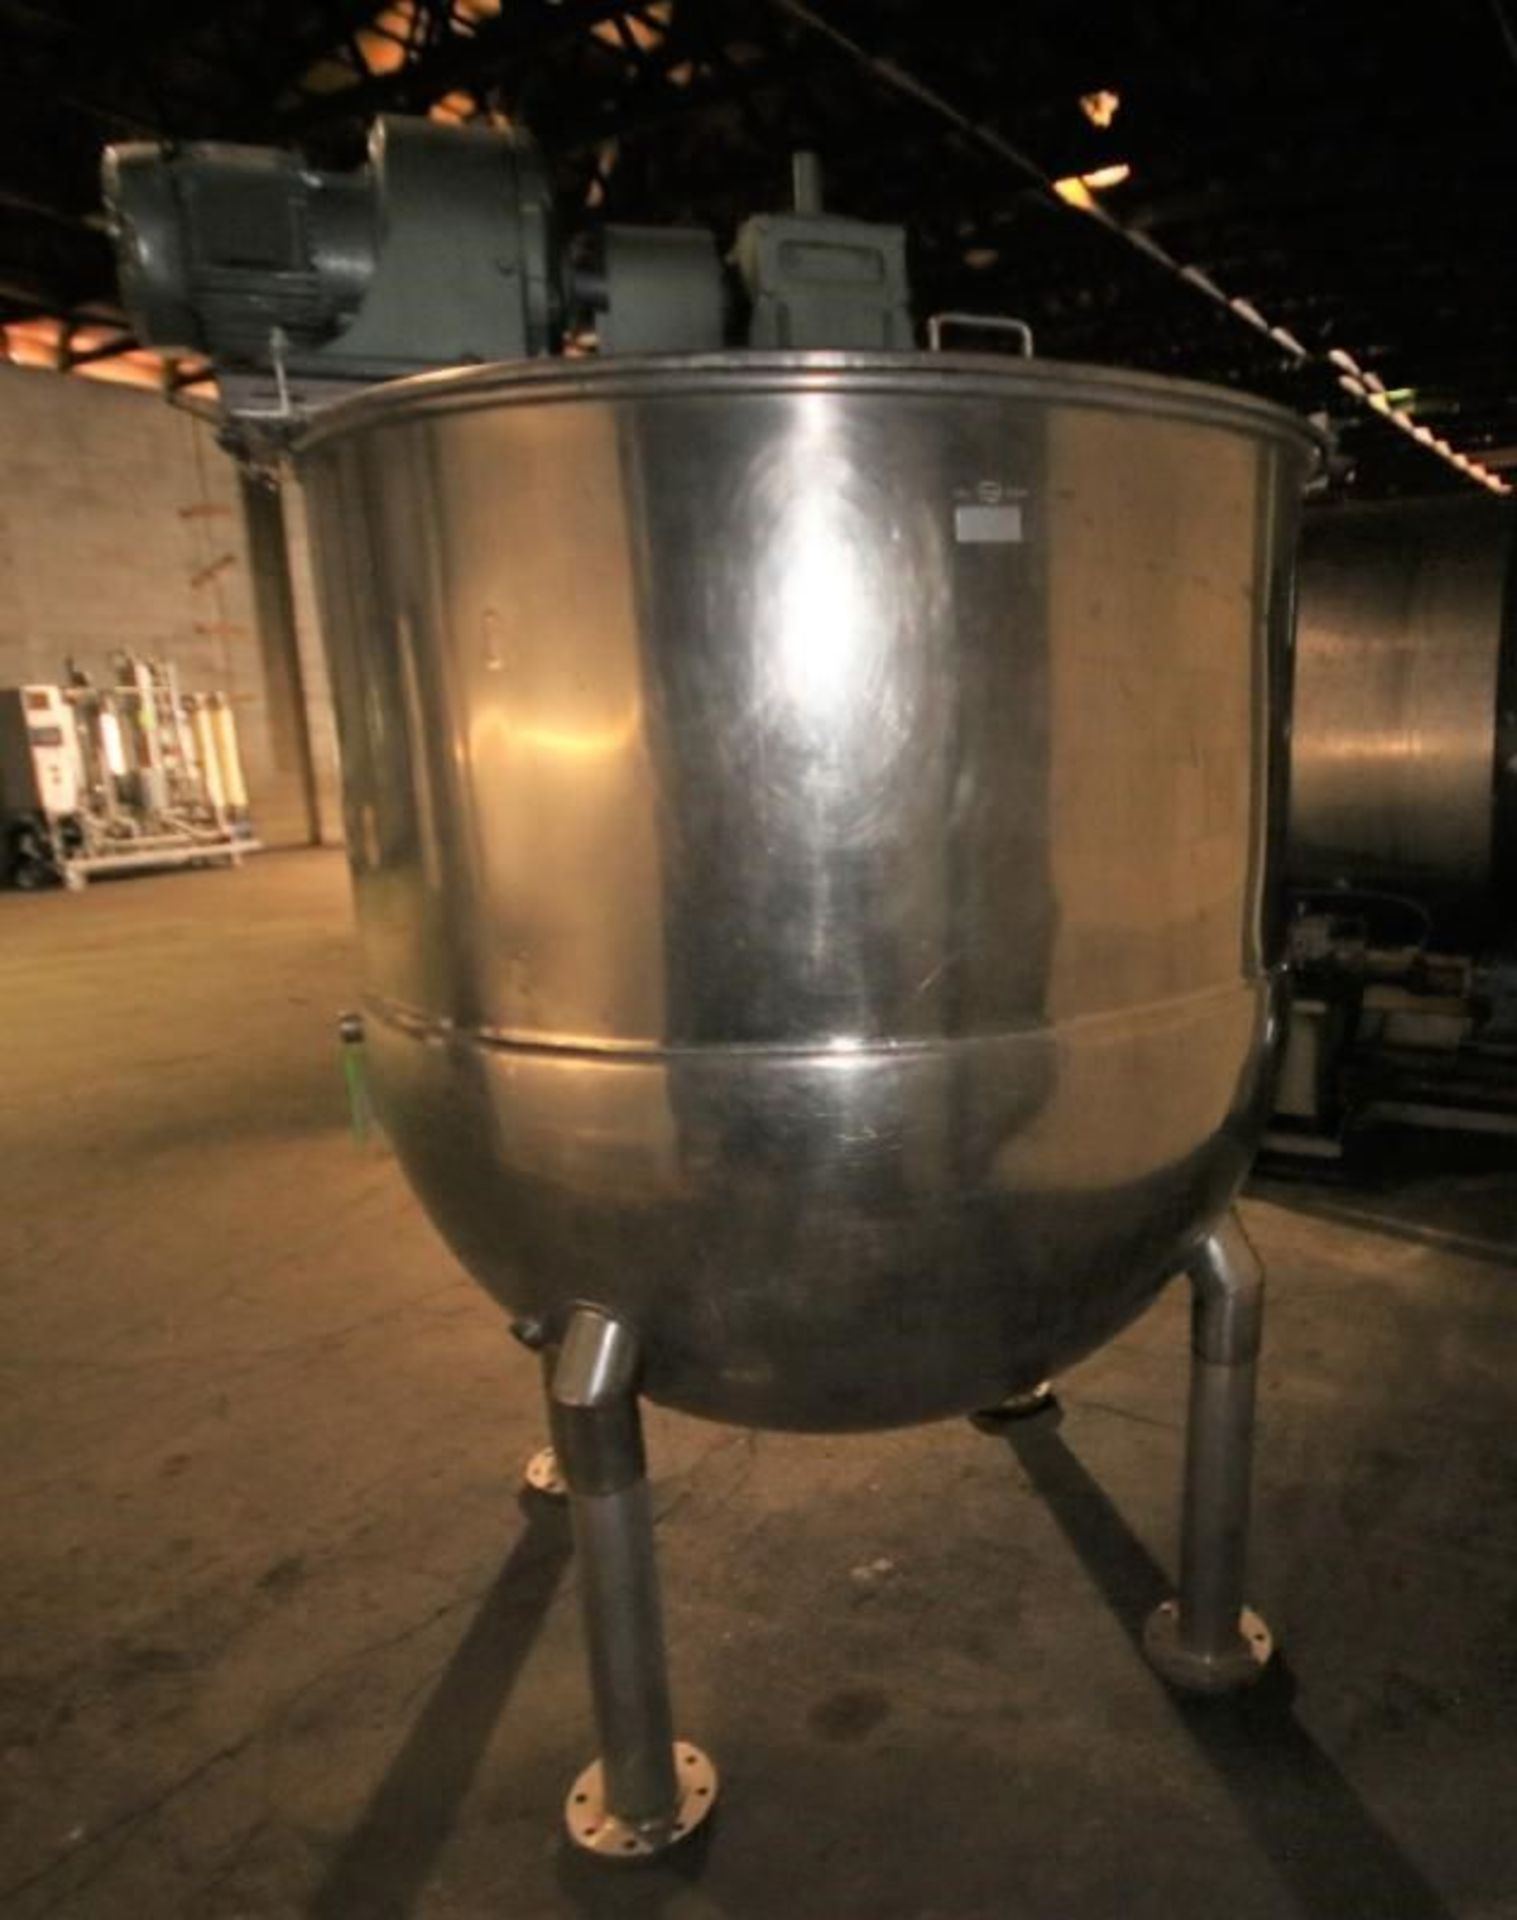 PPPE 650 Gal. Jacketed S/S Kettle, SN 1H3210Z0Z708, with S/S Bridge Agitator with 7.5 hp / 1755 RPM, - Image 10 of 10